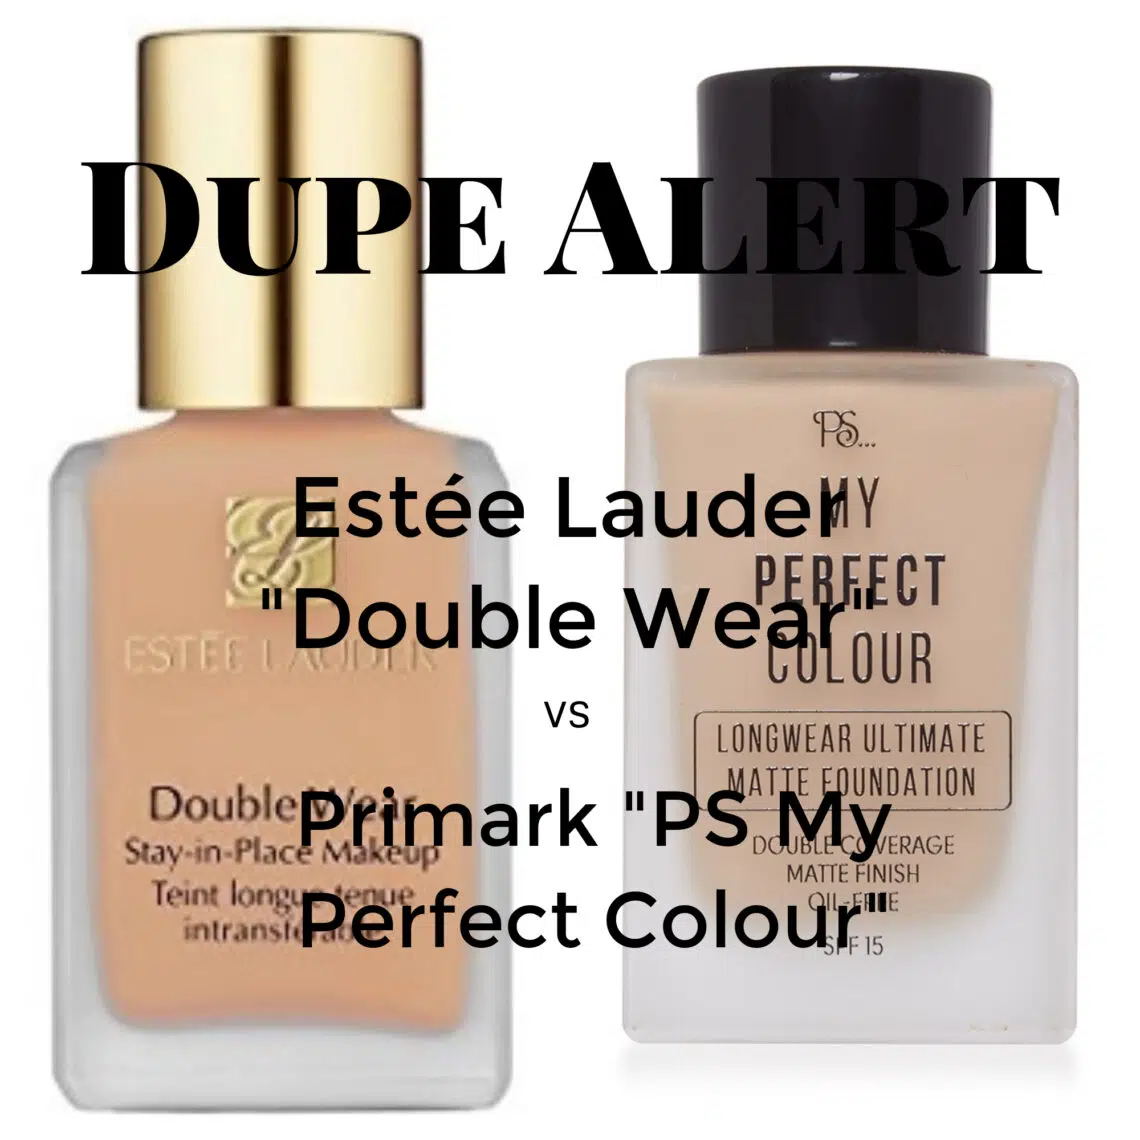 My affordable dupe for the estee lauder double wear foundation